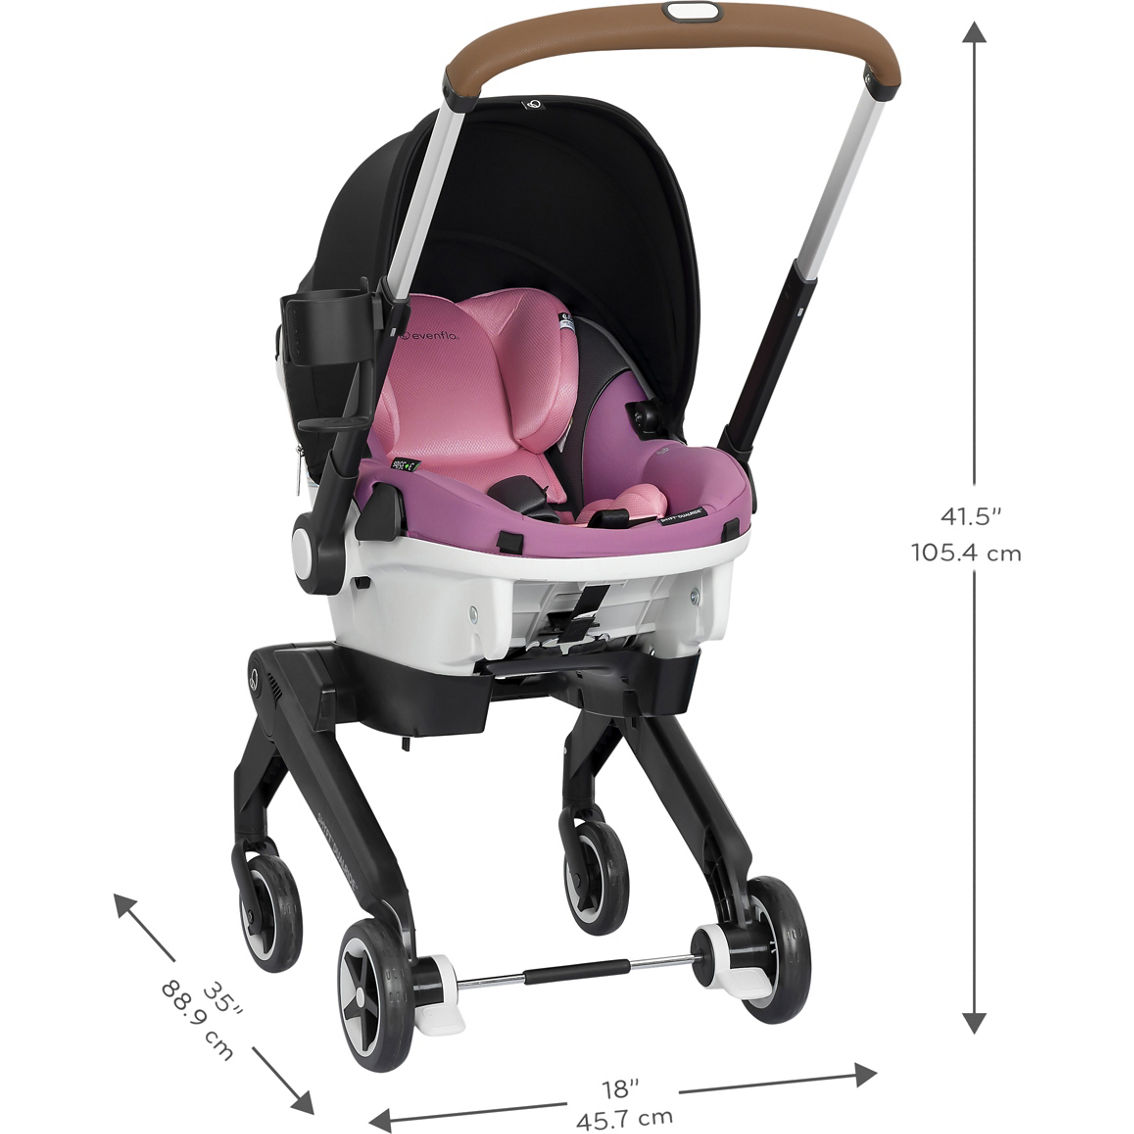 Evenflo Gold Shyft DualRide with Carryall Storage Infant Car Seat and Stroller - Image 5 of 8